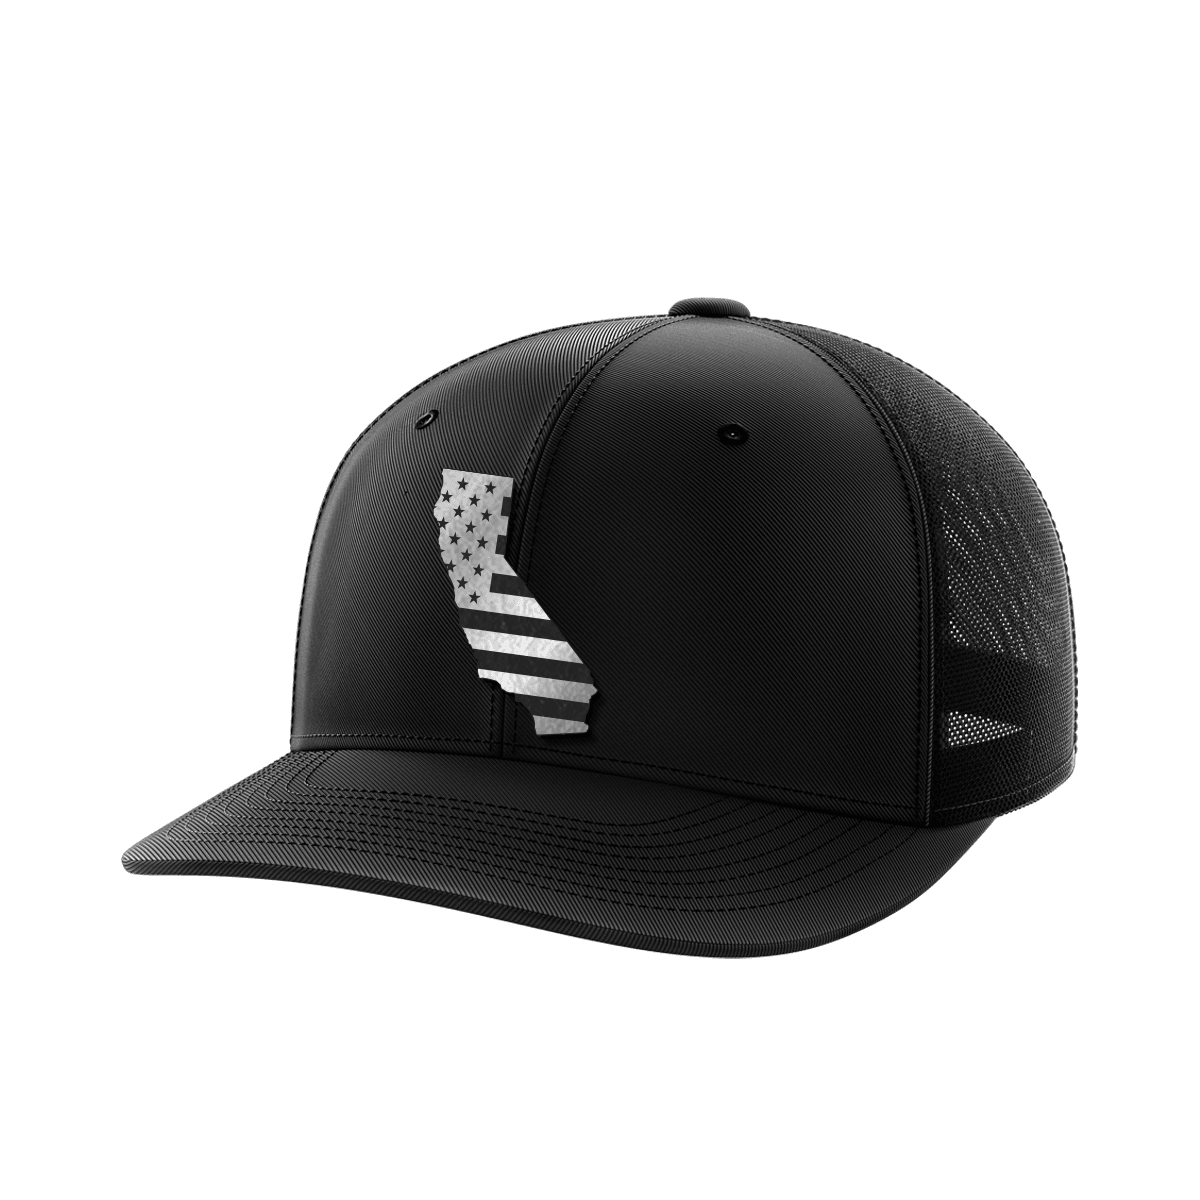 California United Collection (black leather) - Greater Half